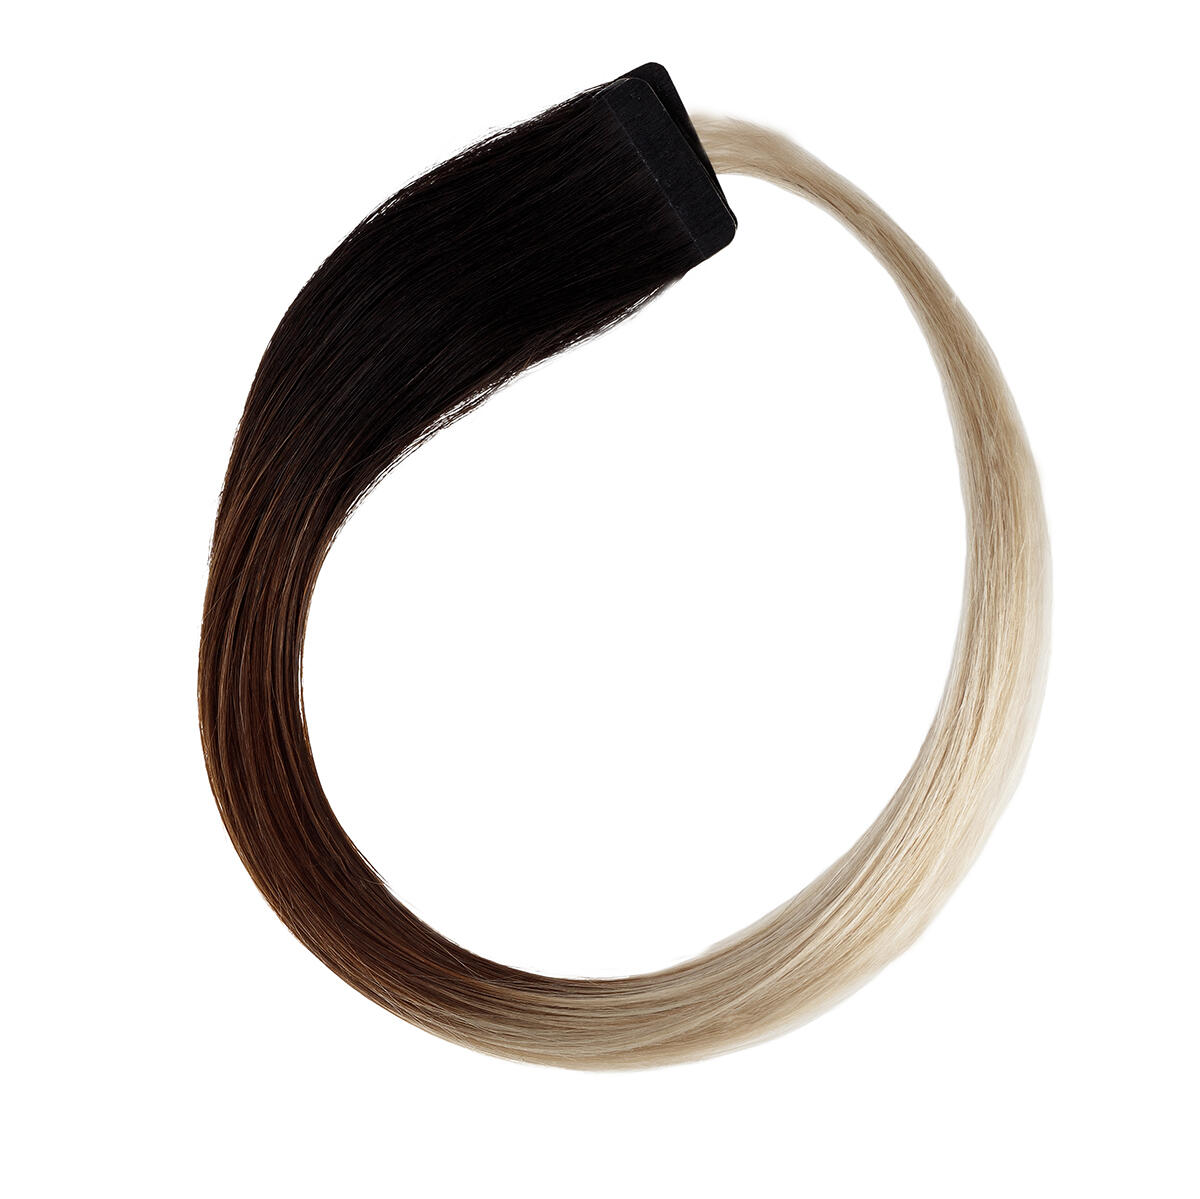 Basic Tape Extensions Classic 4 O1.2/99.6 Grey Black Brown Grey Ombre 50 cm